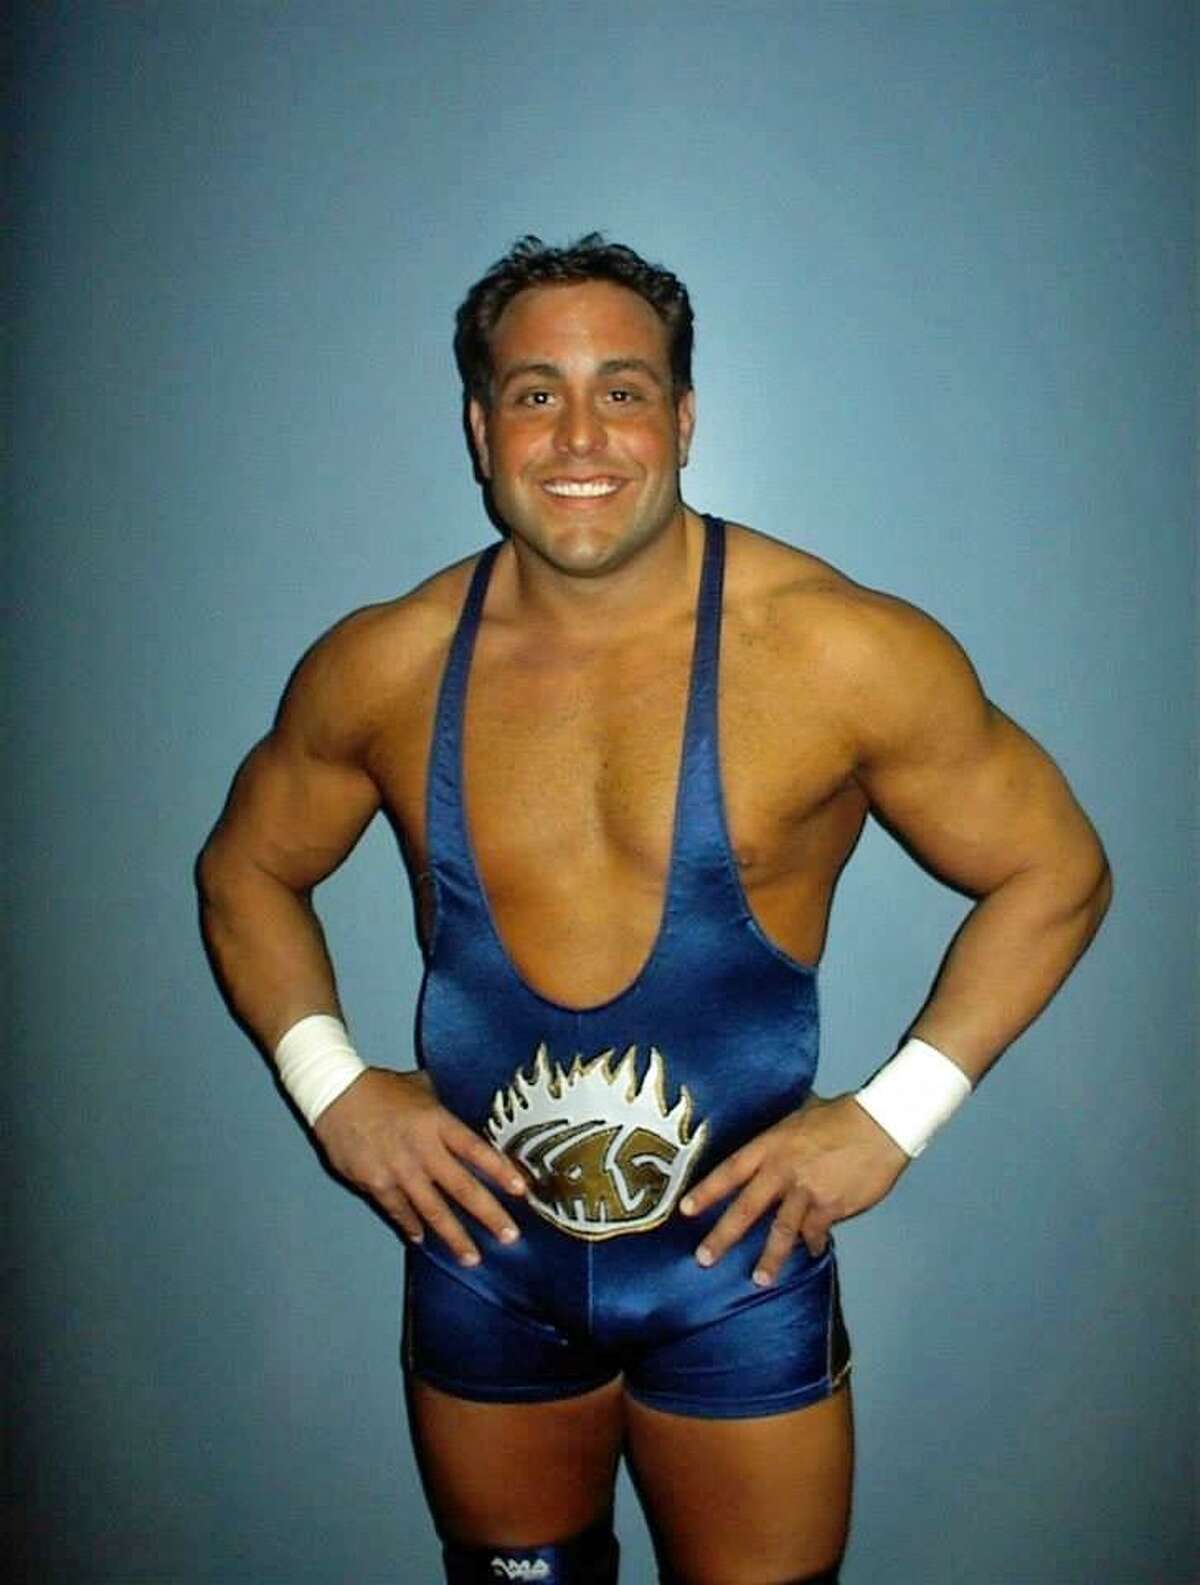 Pete Gasparino back in his WWE wrestling days.